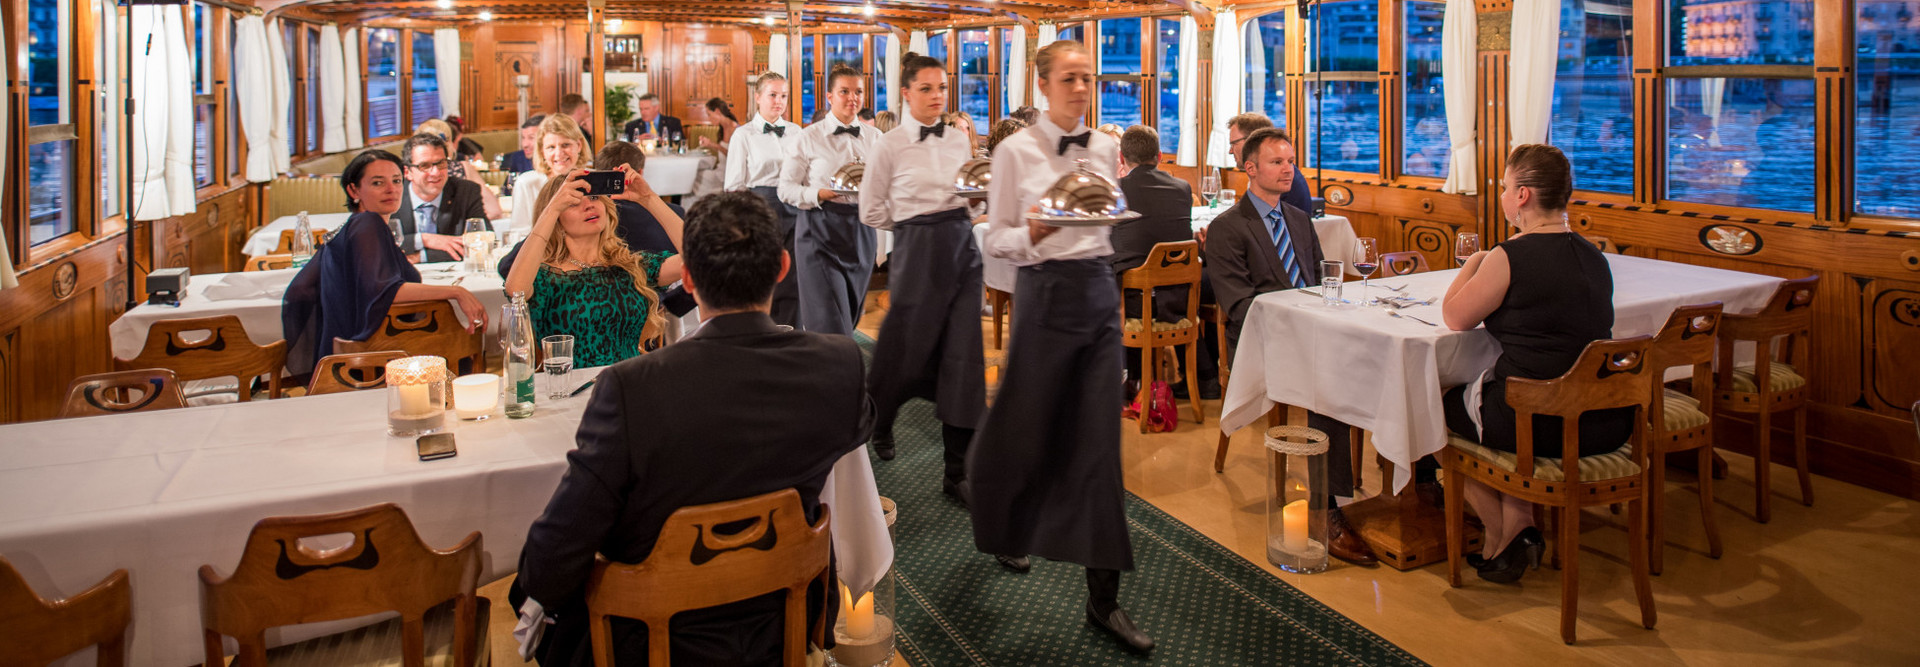 The gala dinner is served on a steamer of the Lake Lucerne Navigation Company